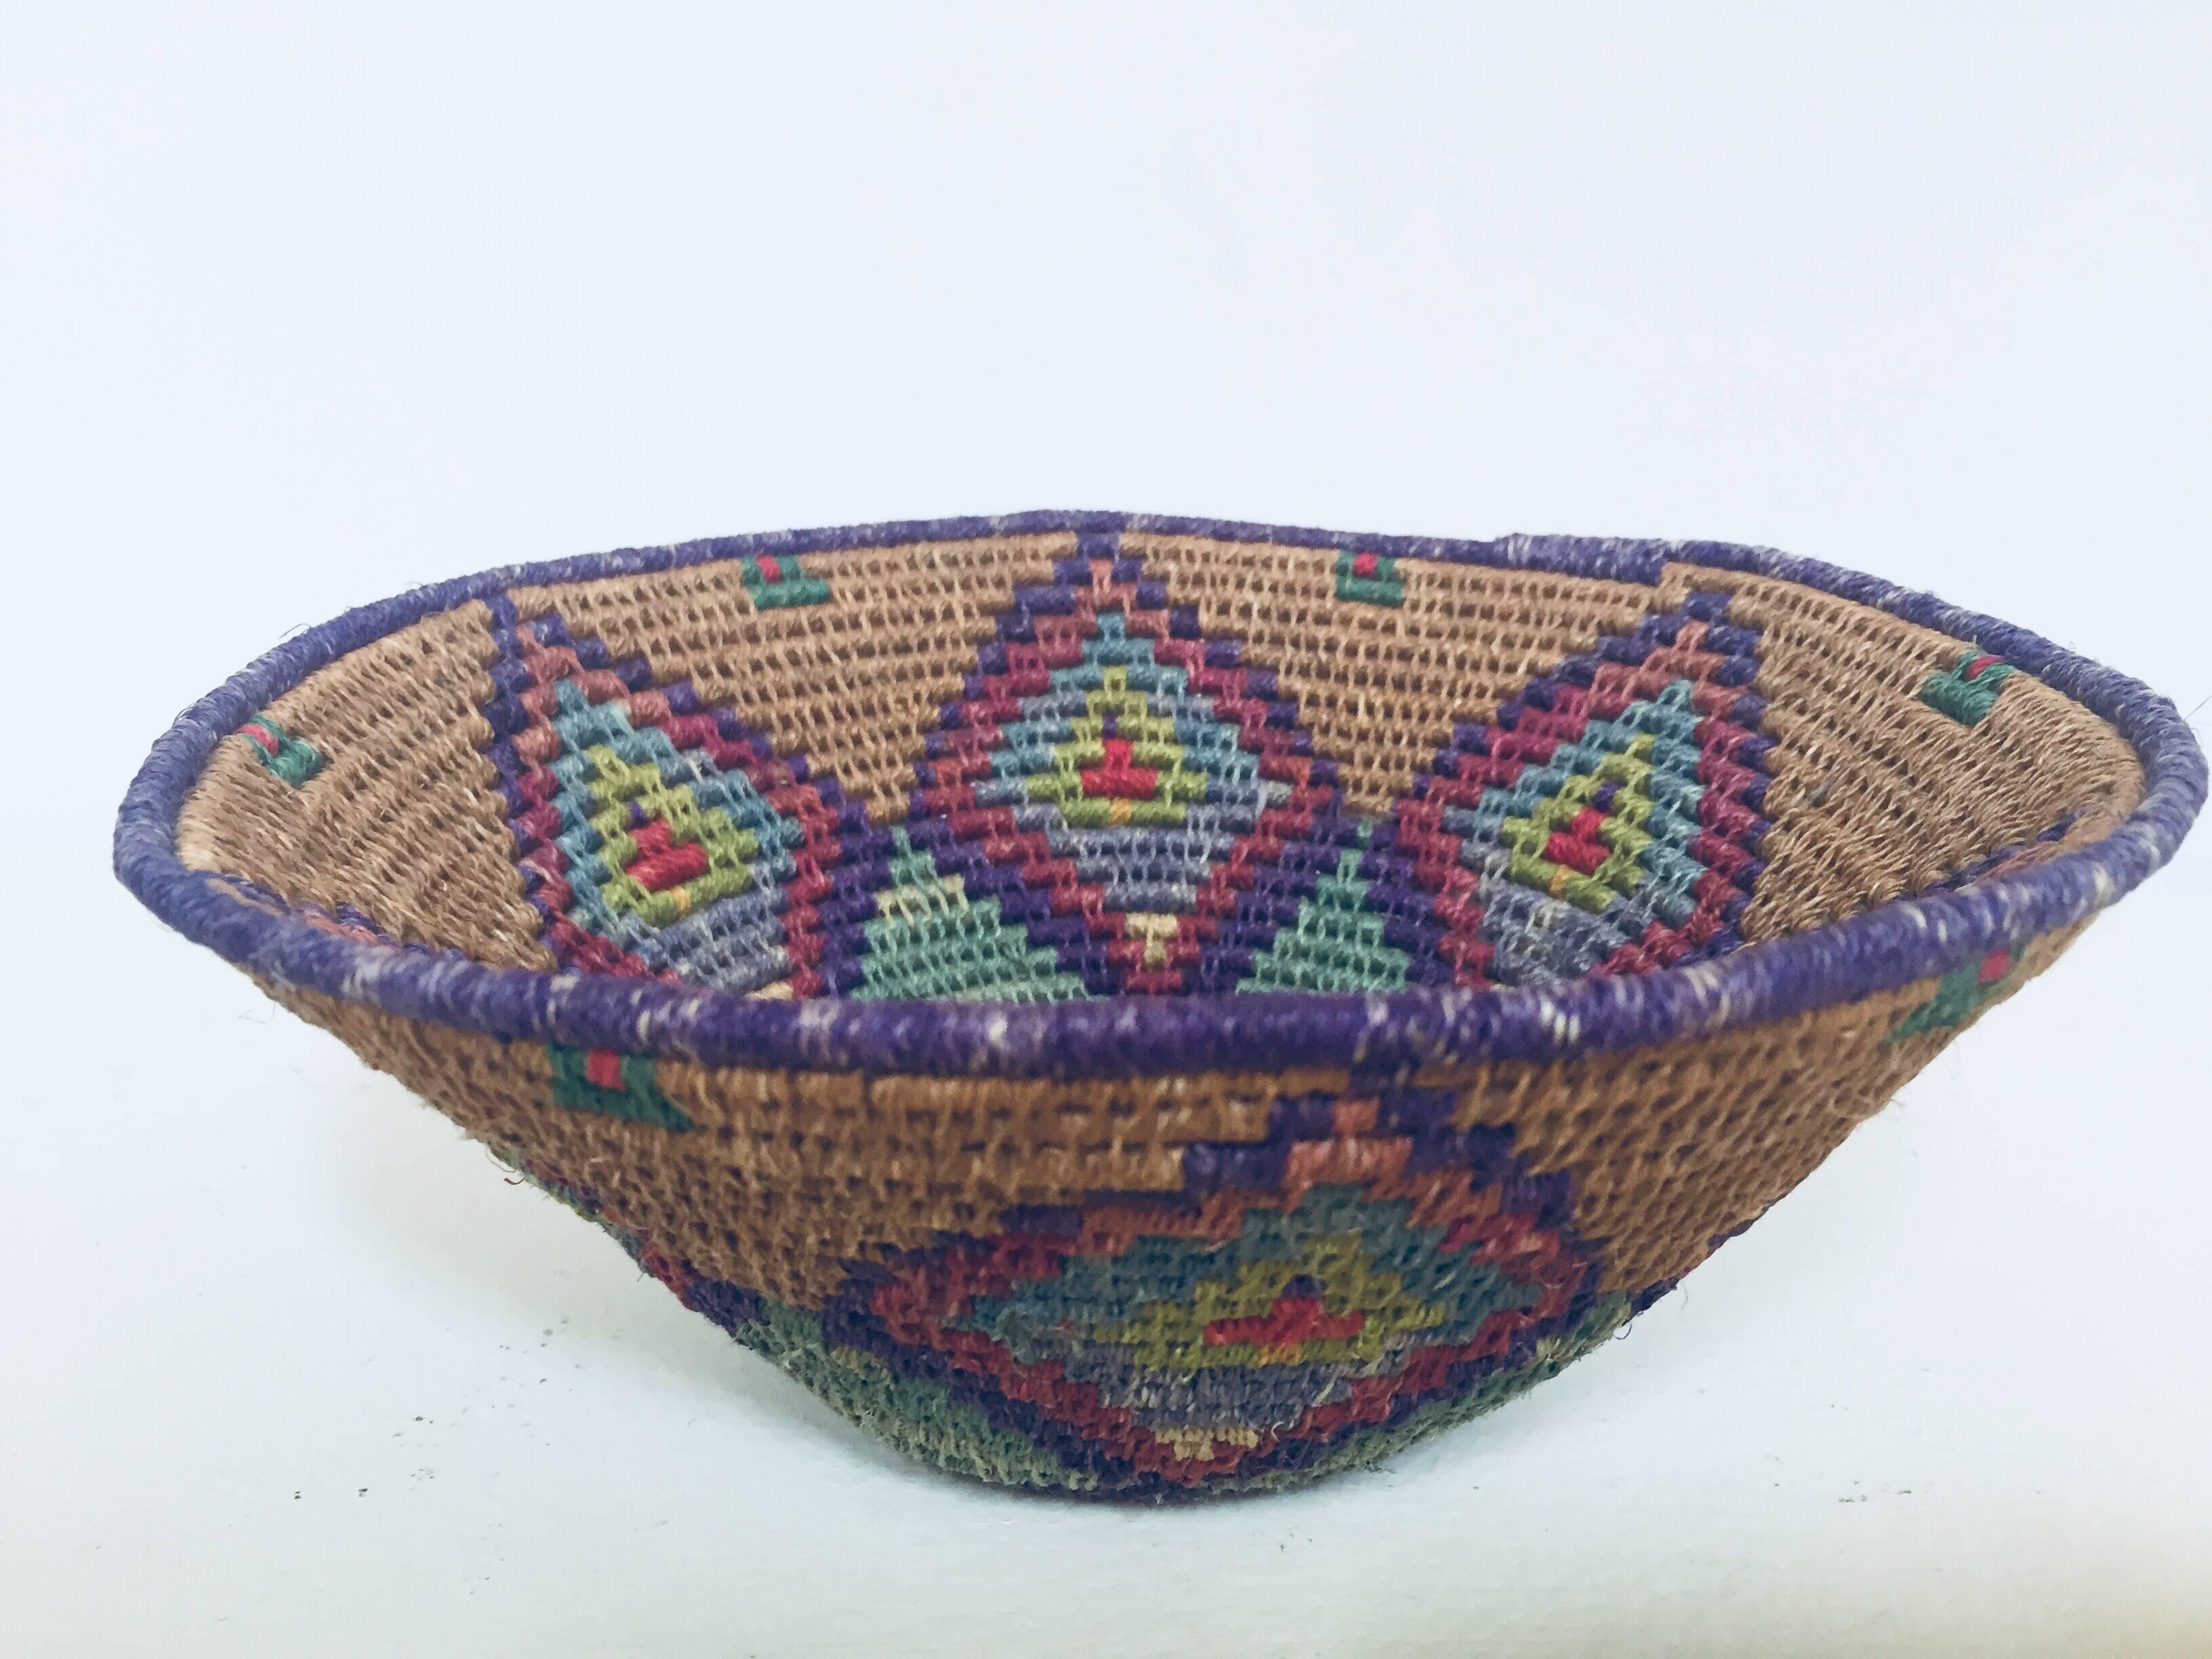 Hand-Woven Native American Polychrome Seagrass and Silk Woven Basket